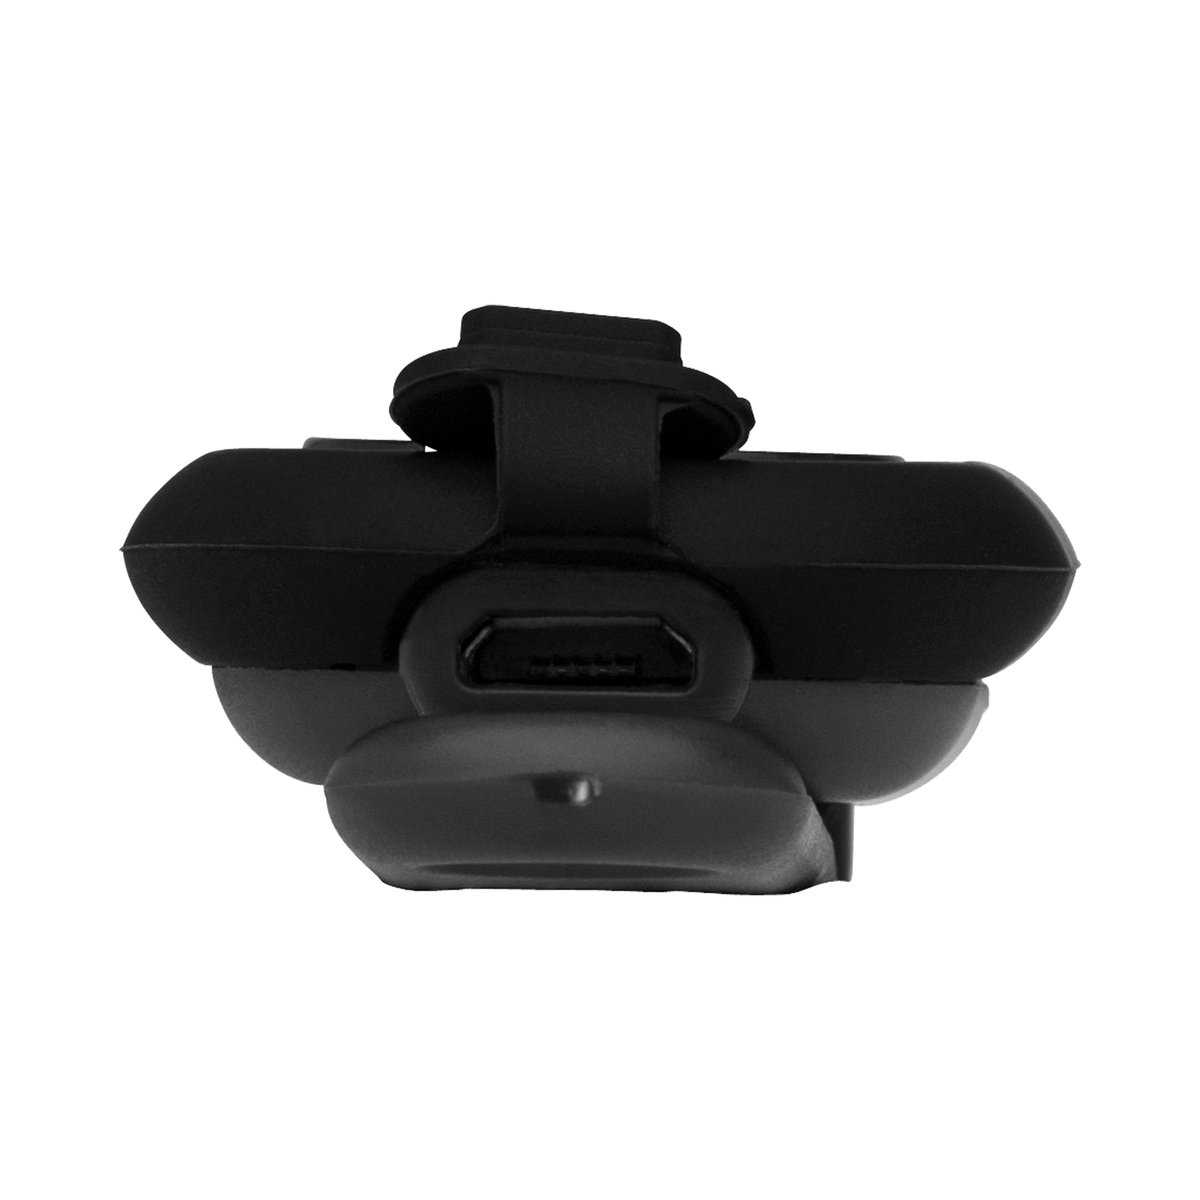 Bluetooth® adapter with headphones REEVES-COLMA black